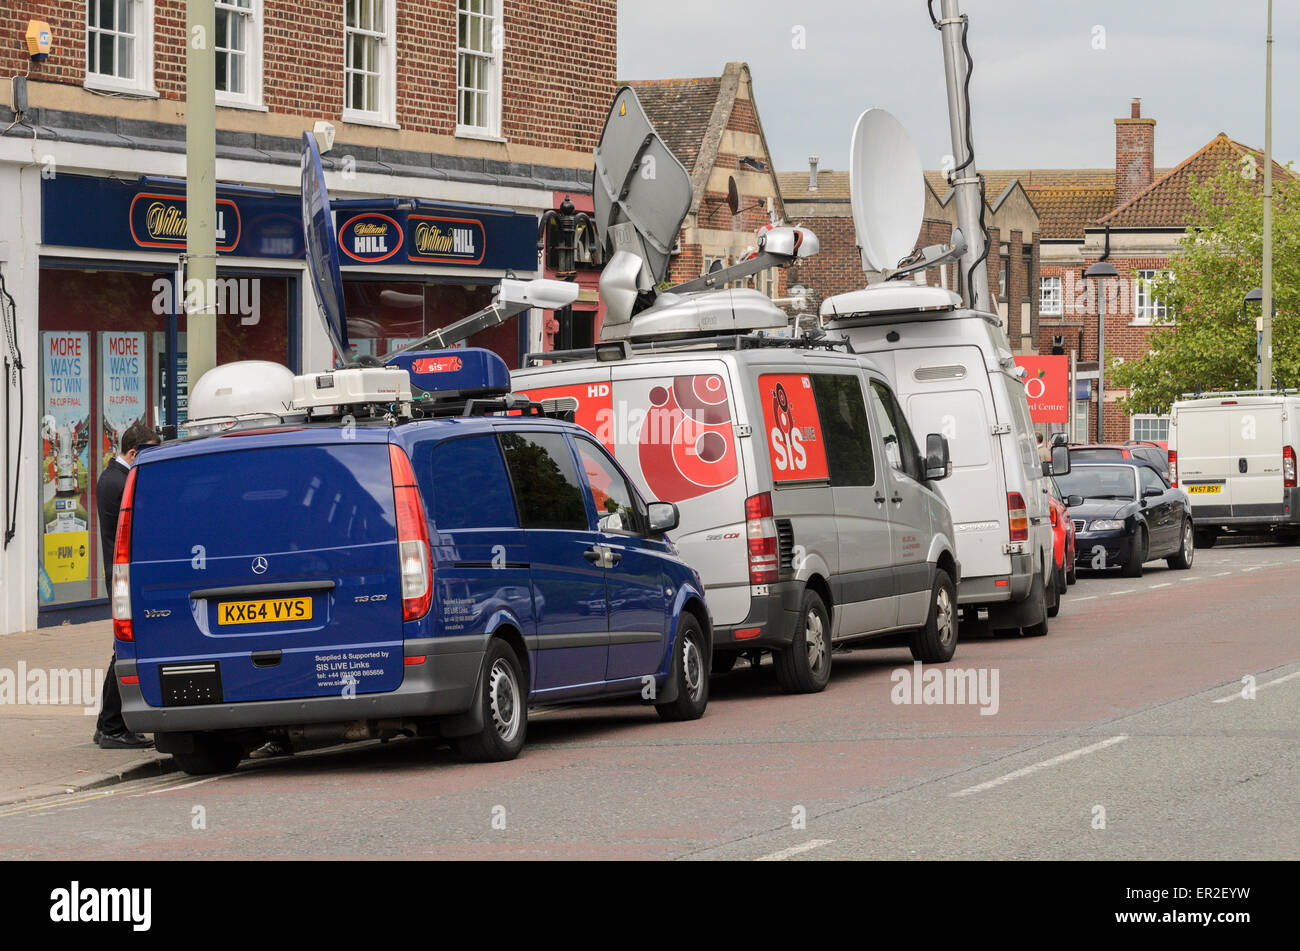 Didcot, UK. 25th May, 2015. The Police cordon at the scene of a triple murder at Vicarage Road, Didcot, Oxfordshire, U.K 16.49 Hours on 25 May 2015. Police were hunting Jed Allen in connection with a triple murder on 23 May 2015. Credit:  Michael Winters/Alamy Live News Stock Photo